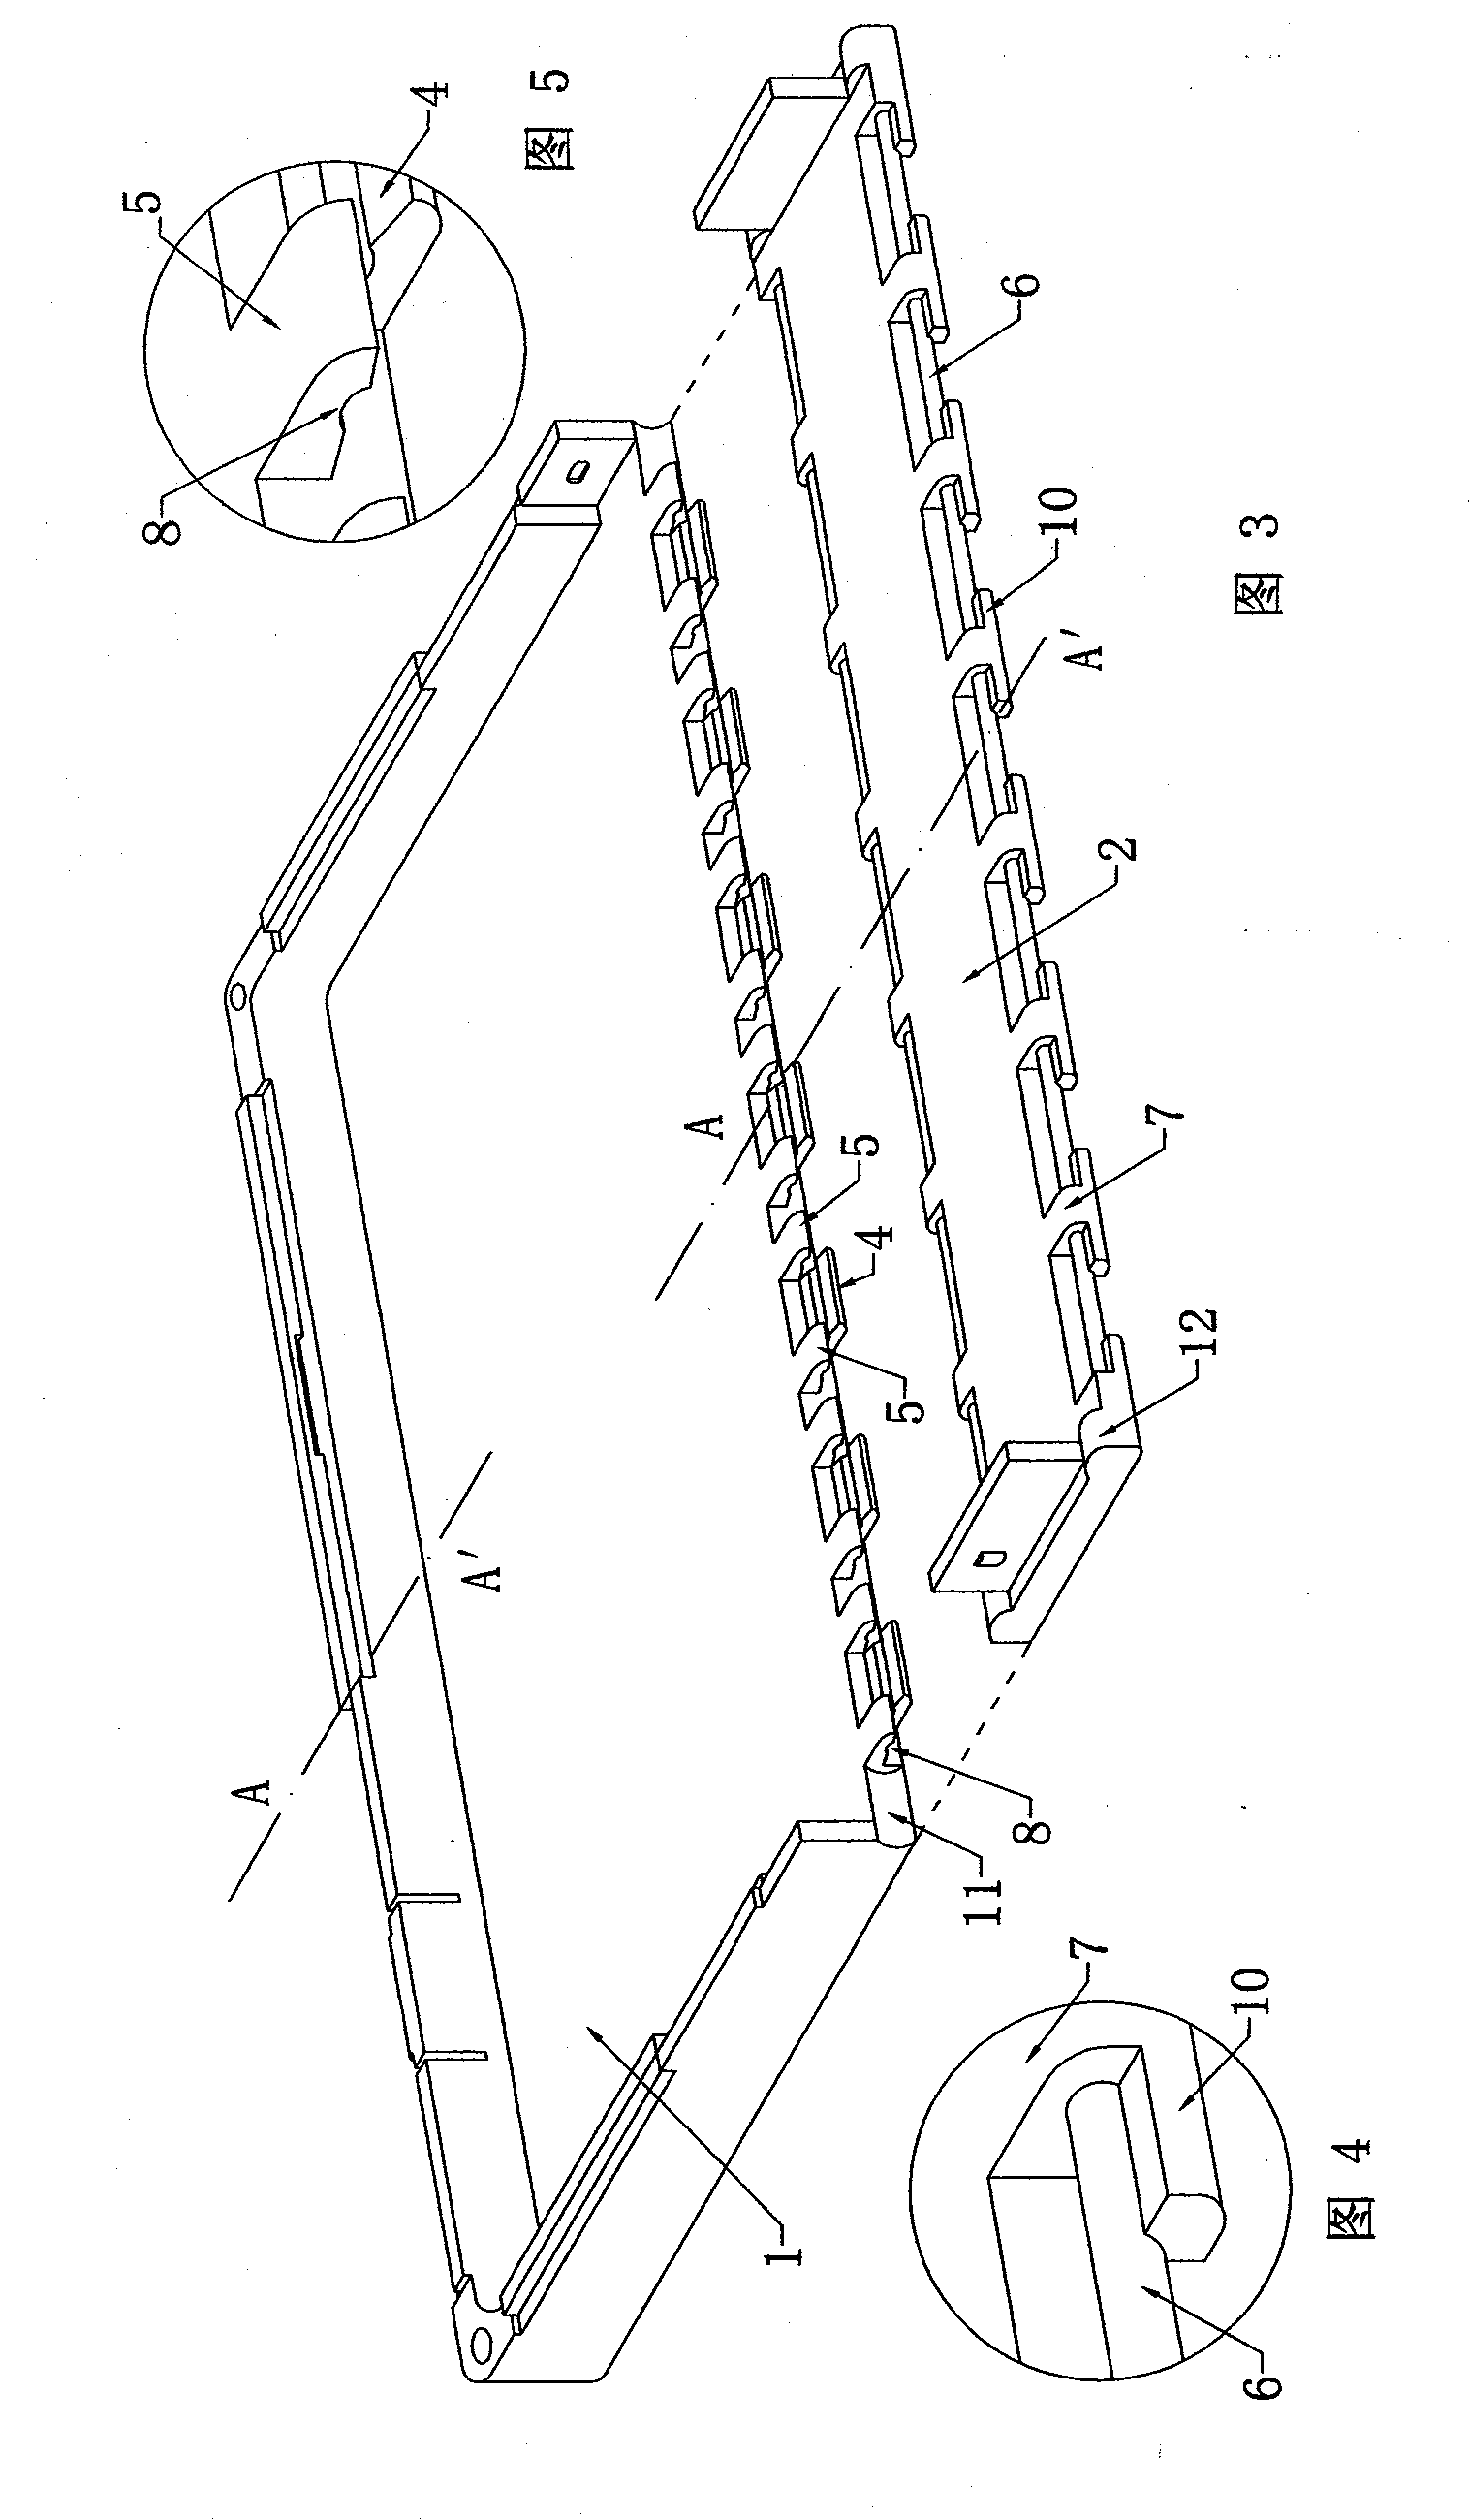 Appliances with clamping-interlinking-replicating structure